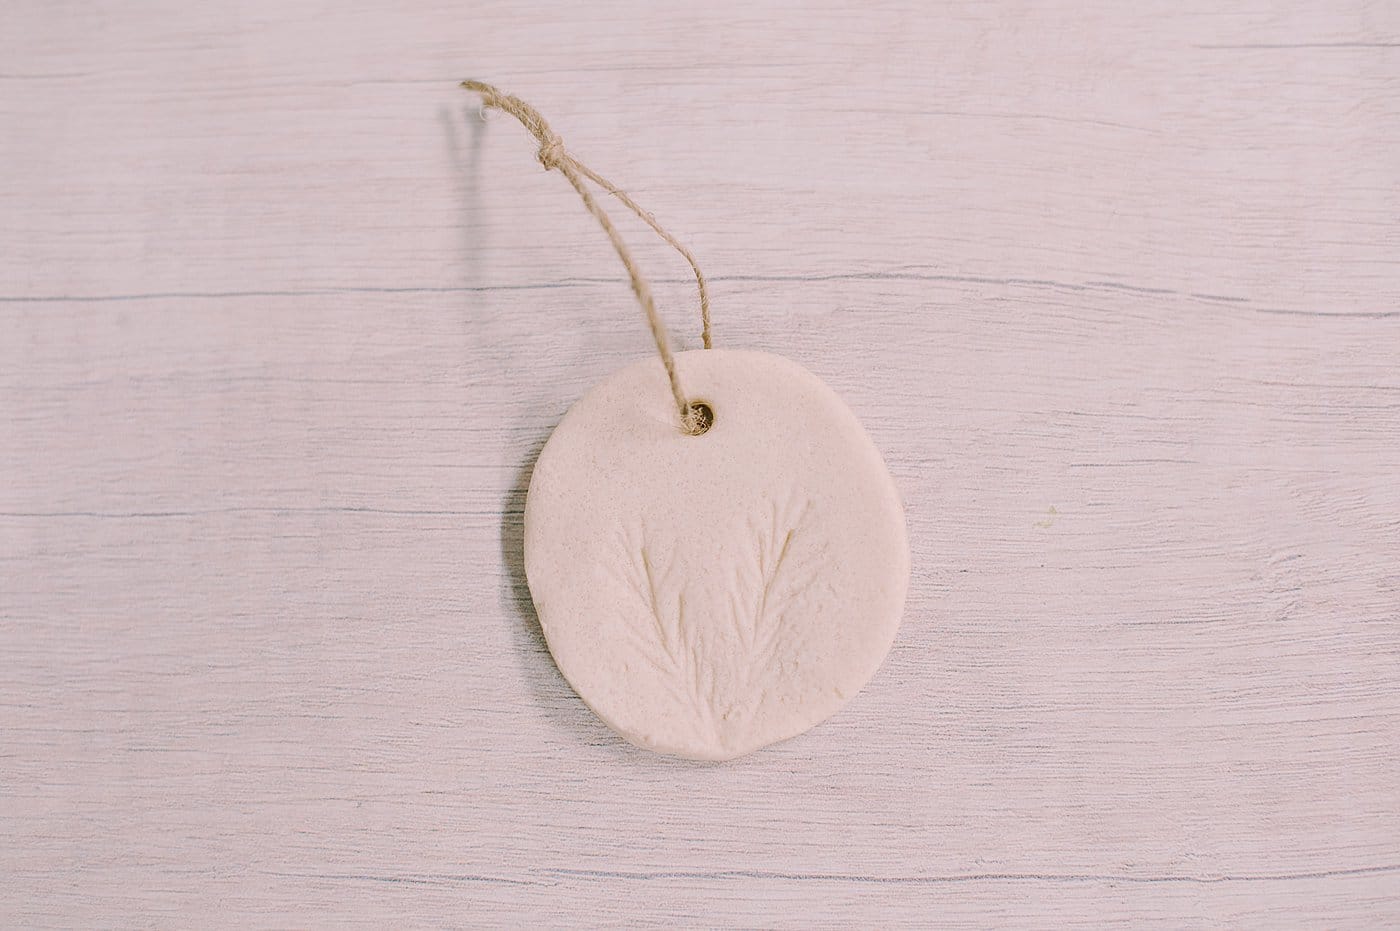 DIY salt dough ornaments with pine needles pressed into them for a pine design embellishment.